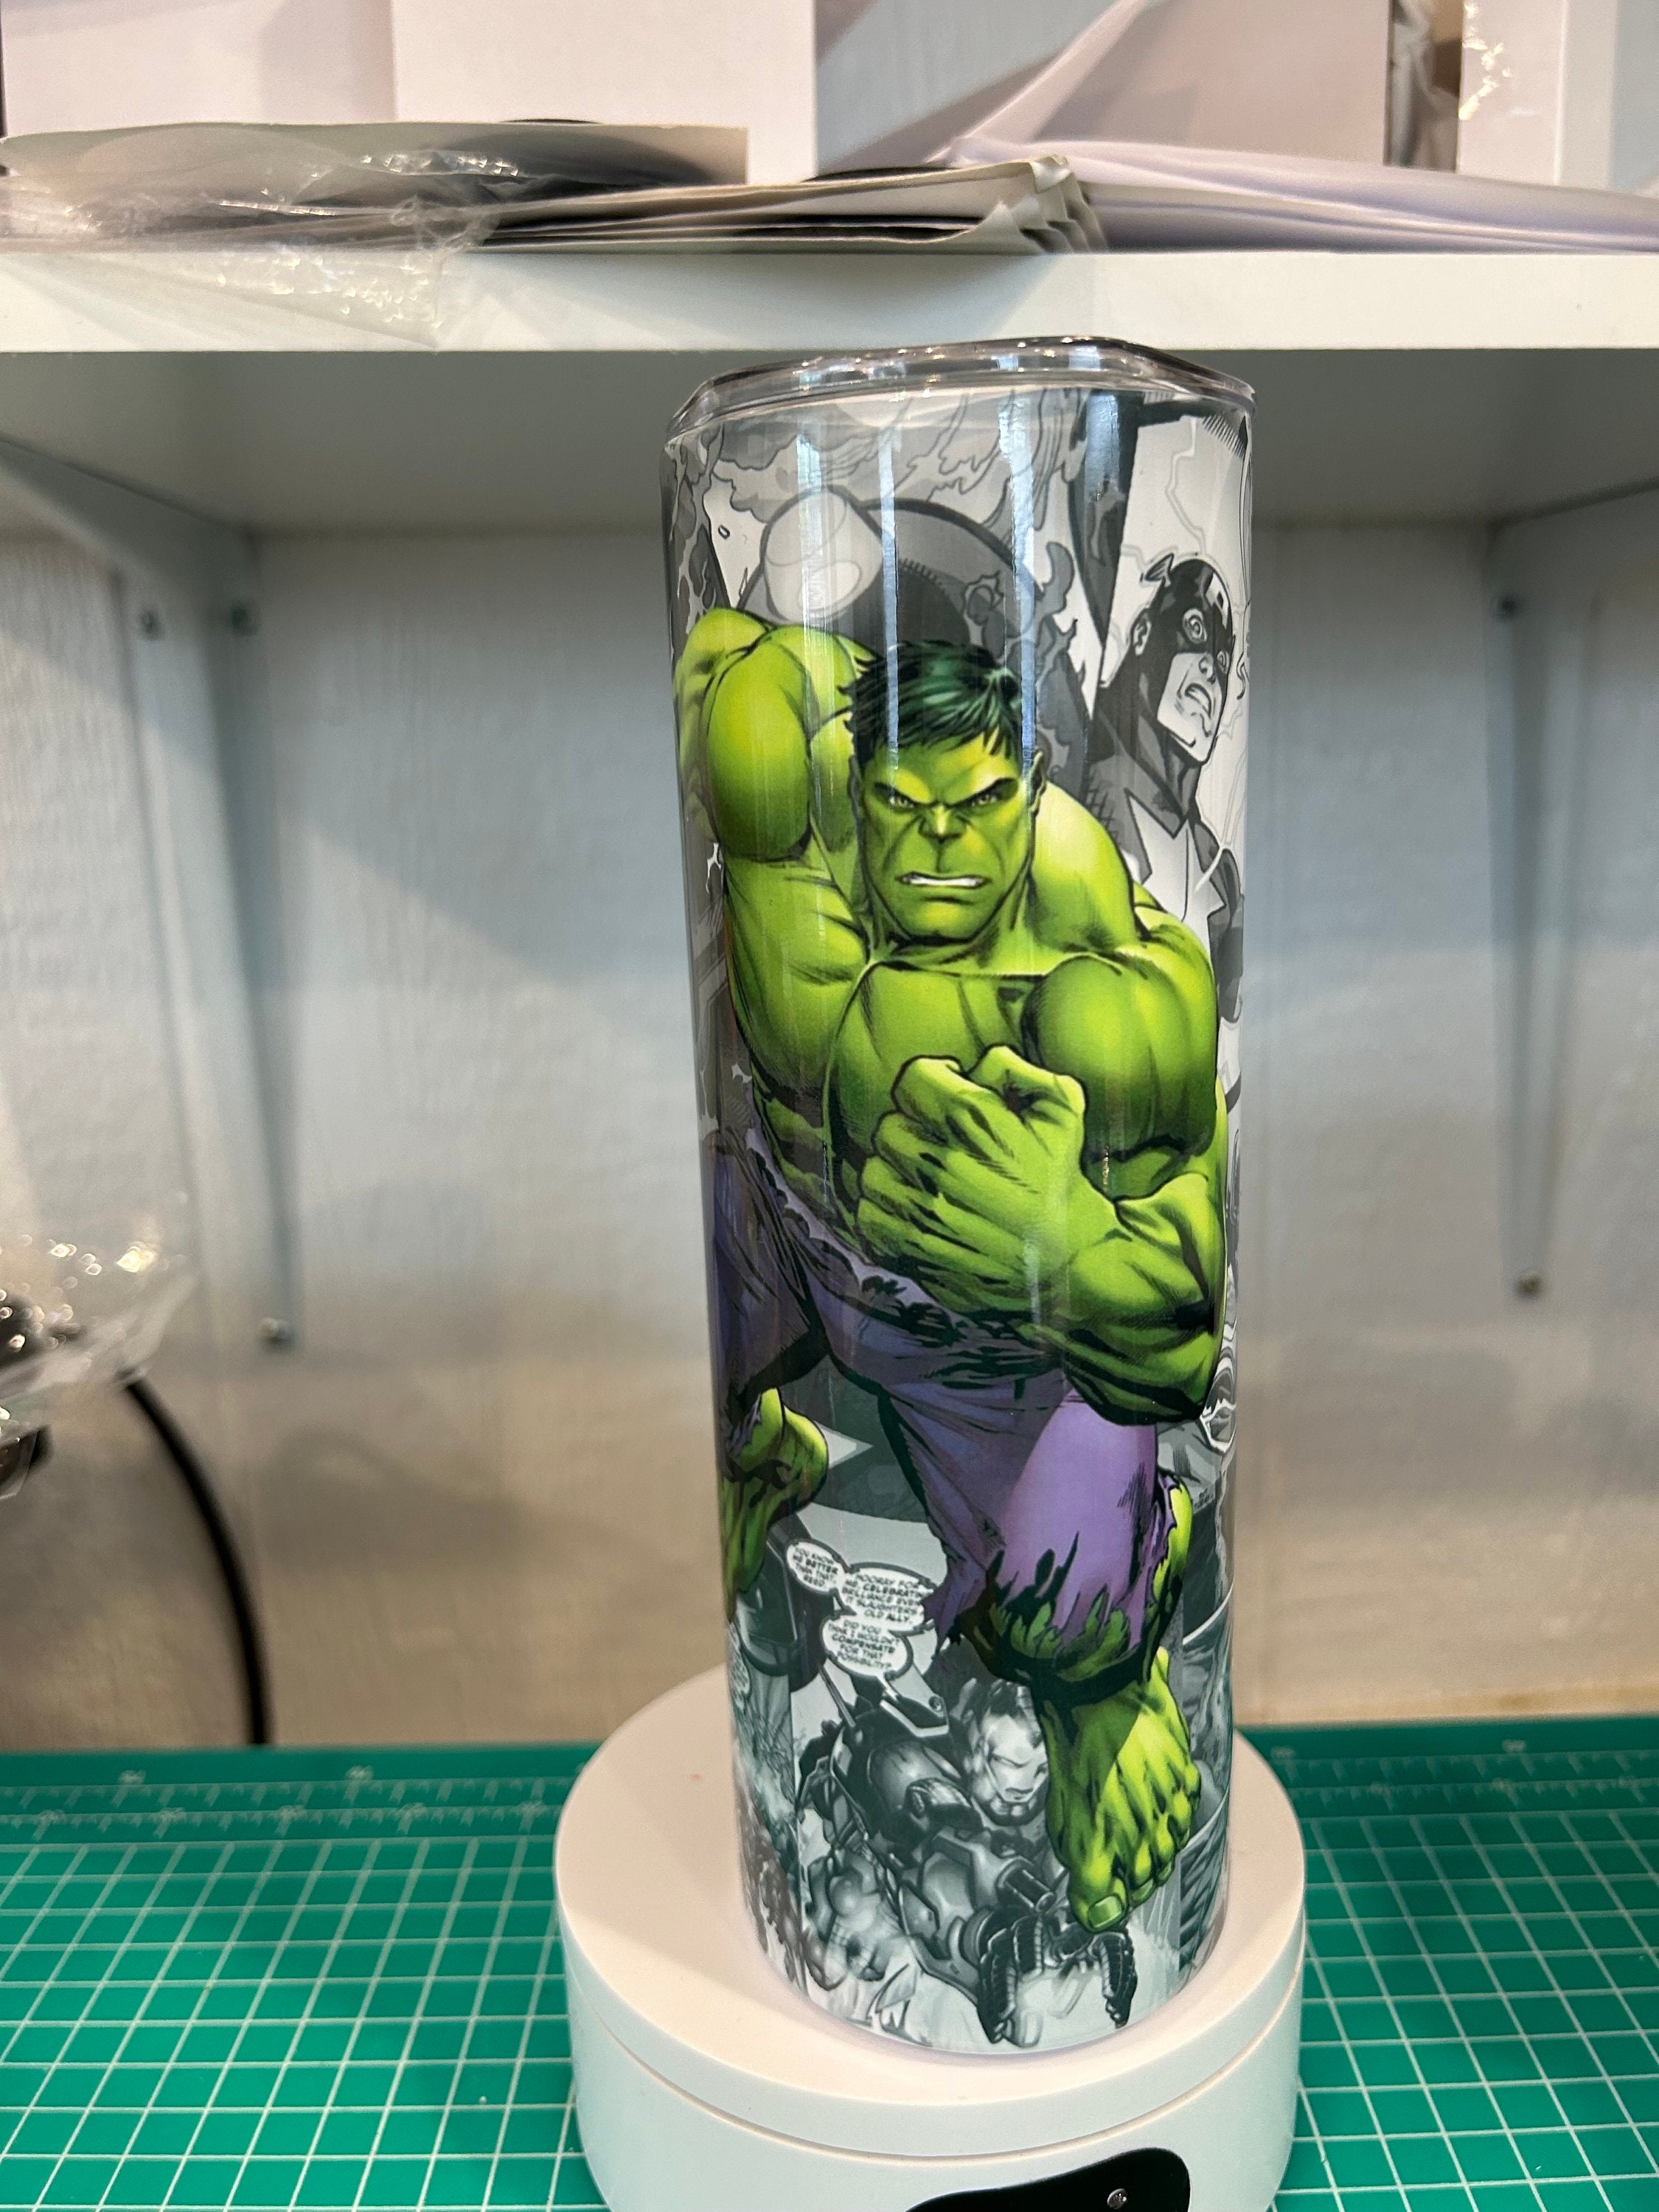 The Avengers ©Marvel stainless steel thermos bottle - Superheroes